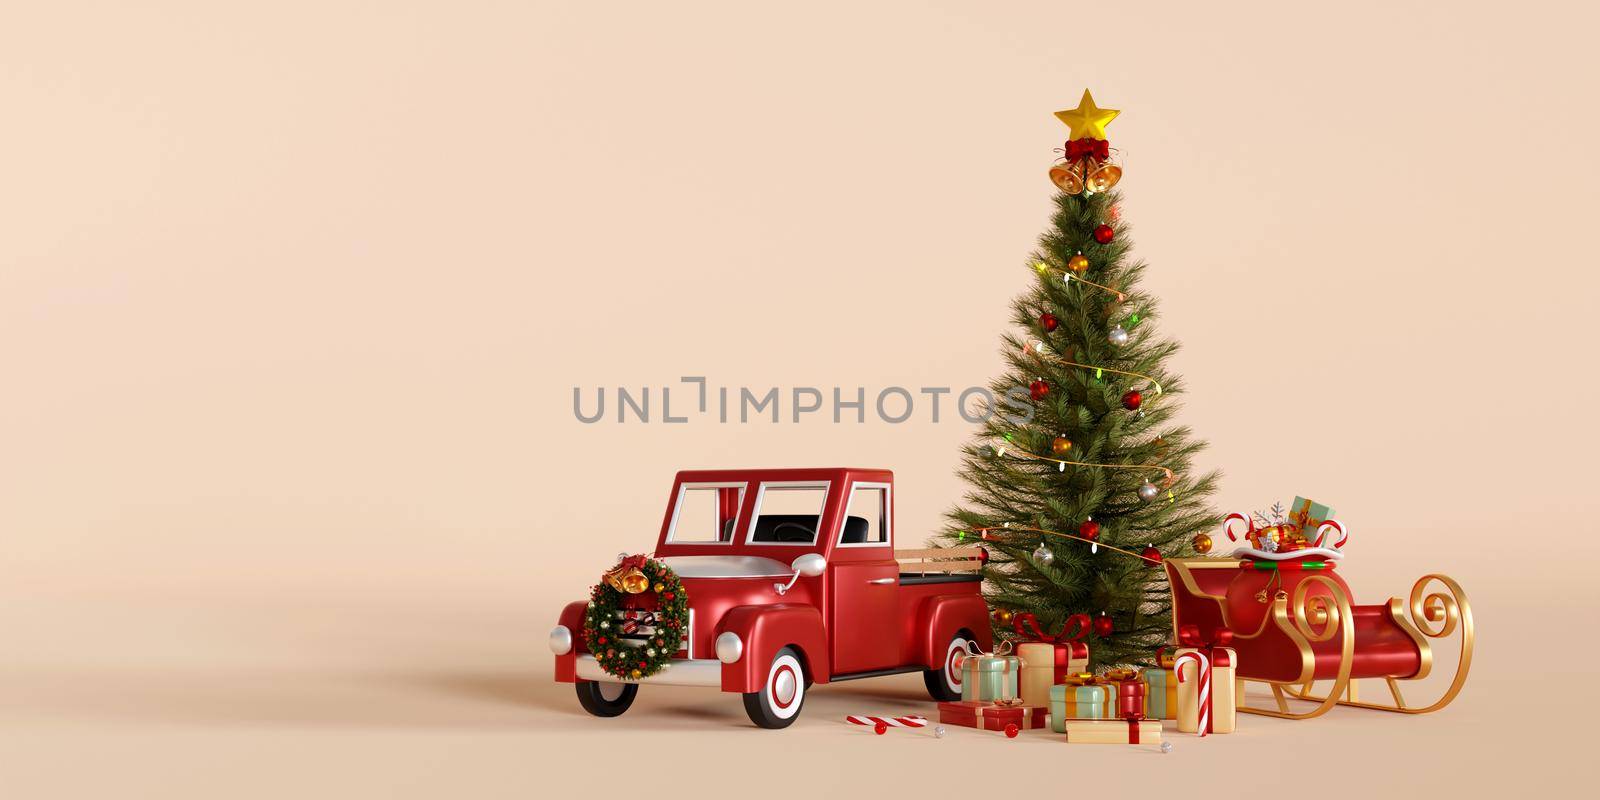 3d illustration of Christmas banner, Christmas tree with truck and sleigh, Merry Christmas by nutzchotwarut